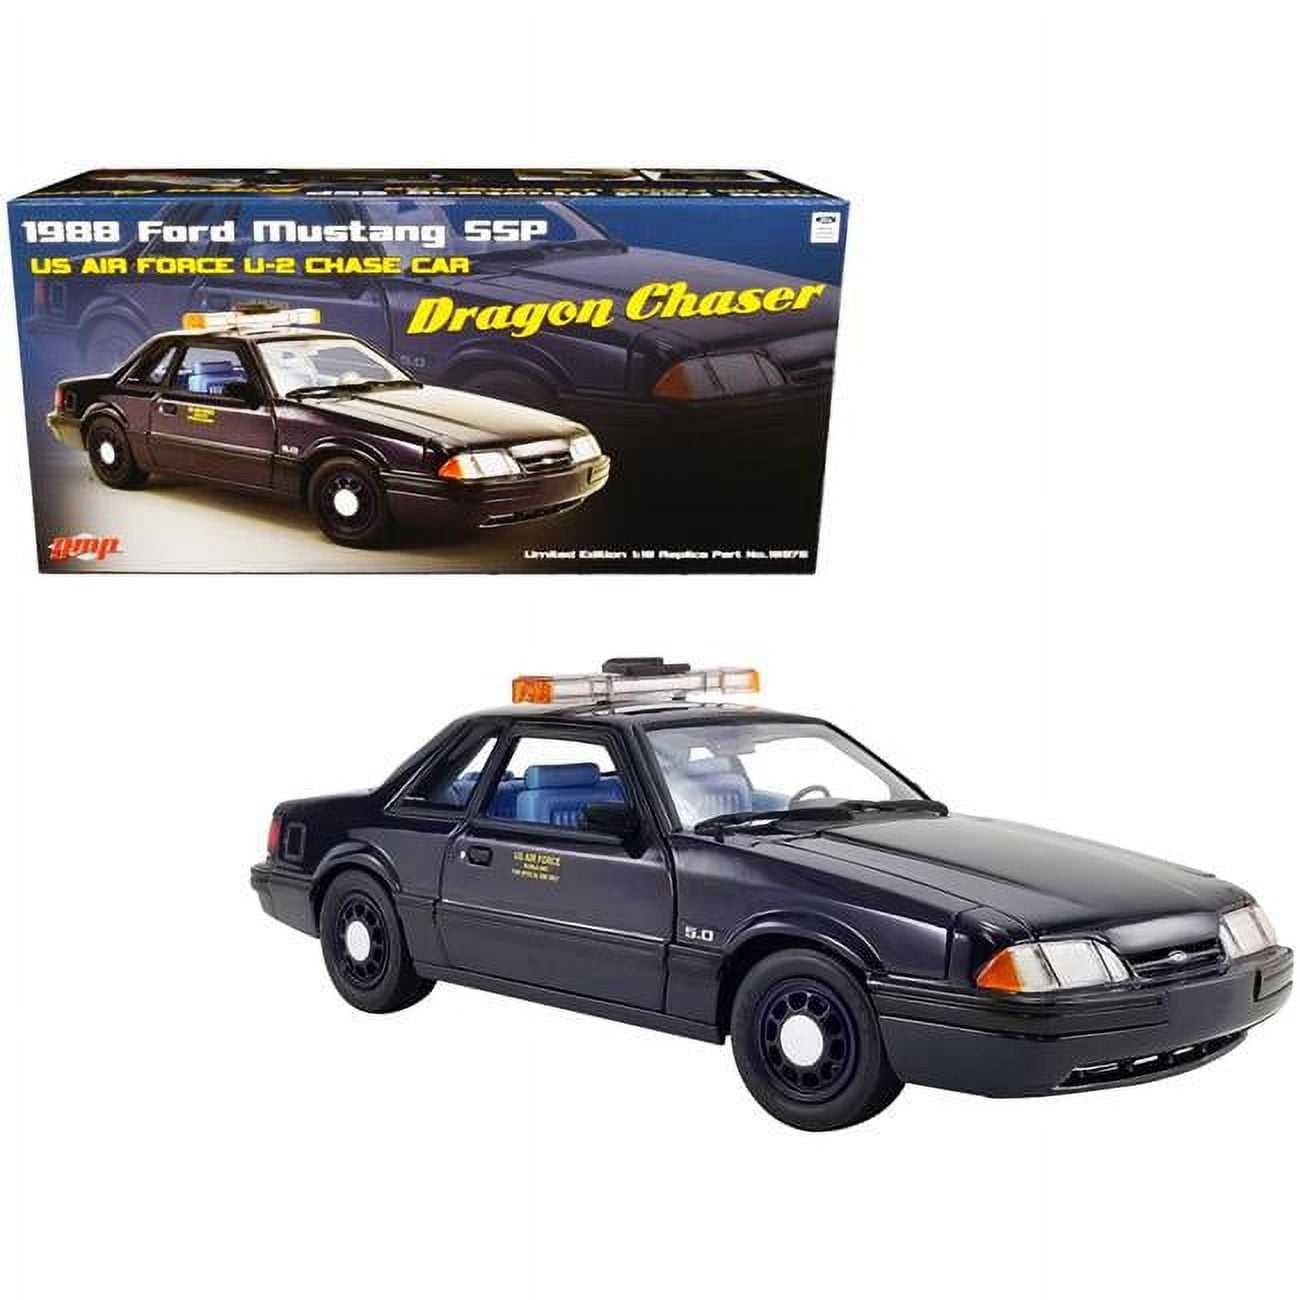 Picture of GMP 18975 1988 Ford Mustang 5.0 SSP Dark Blue U.S. Air Force U-2 Chase Car Dragon Chaser Limited Edition Worldwide 1-18 Diecast Model Car - 852 Piece